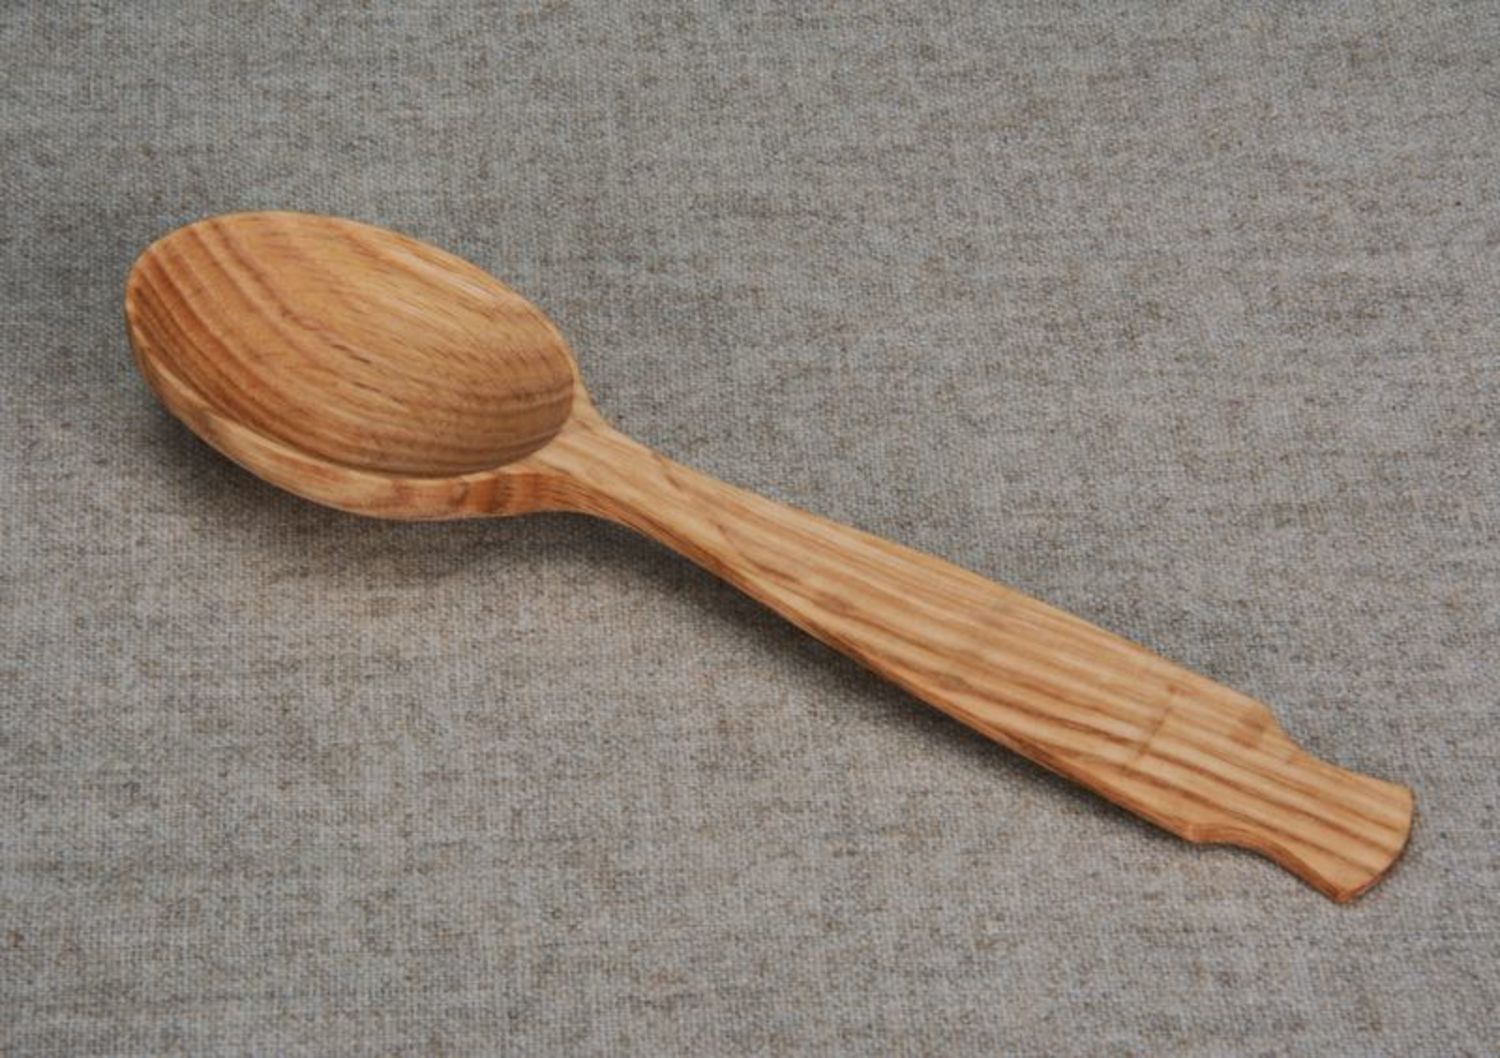 Handmade wooden spoon eco friendly tableware large wooden spoon kitchen decor photo 4